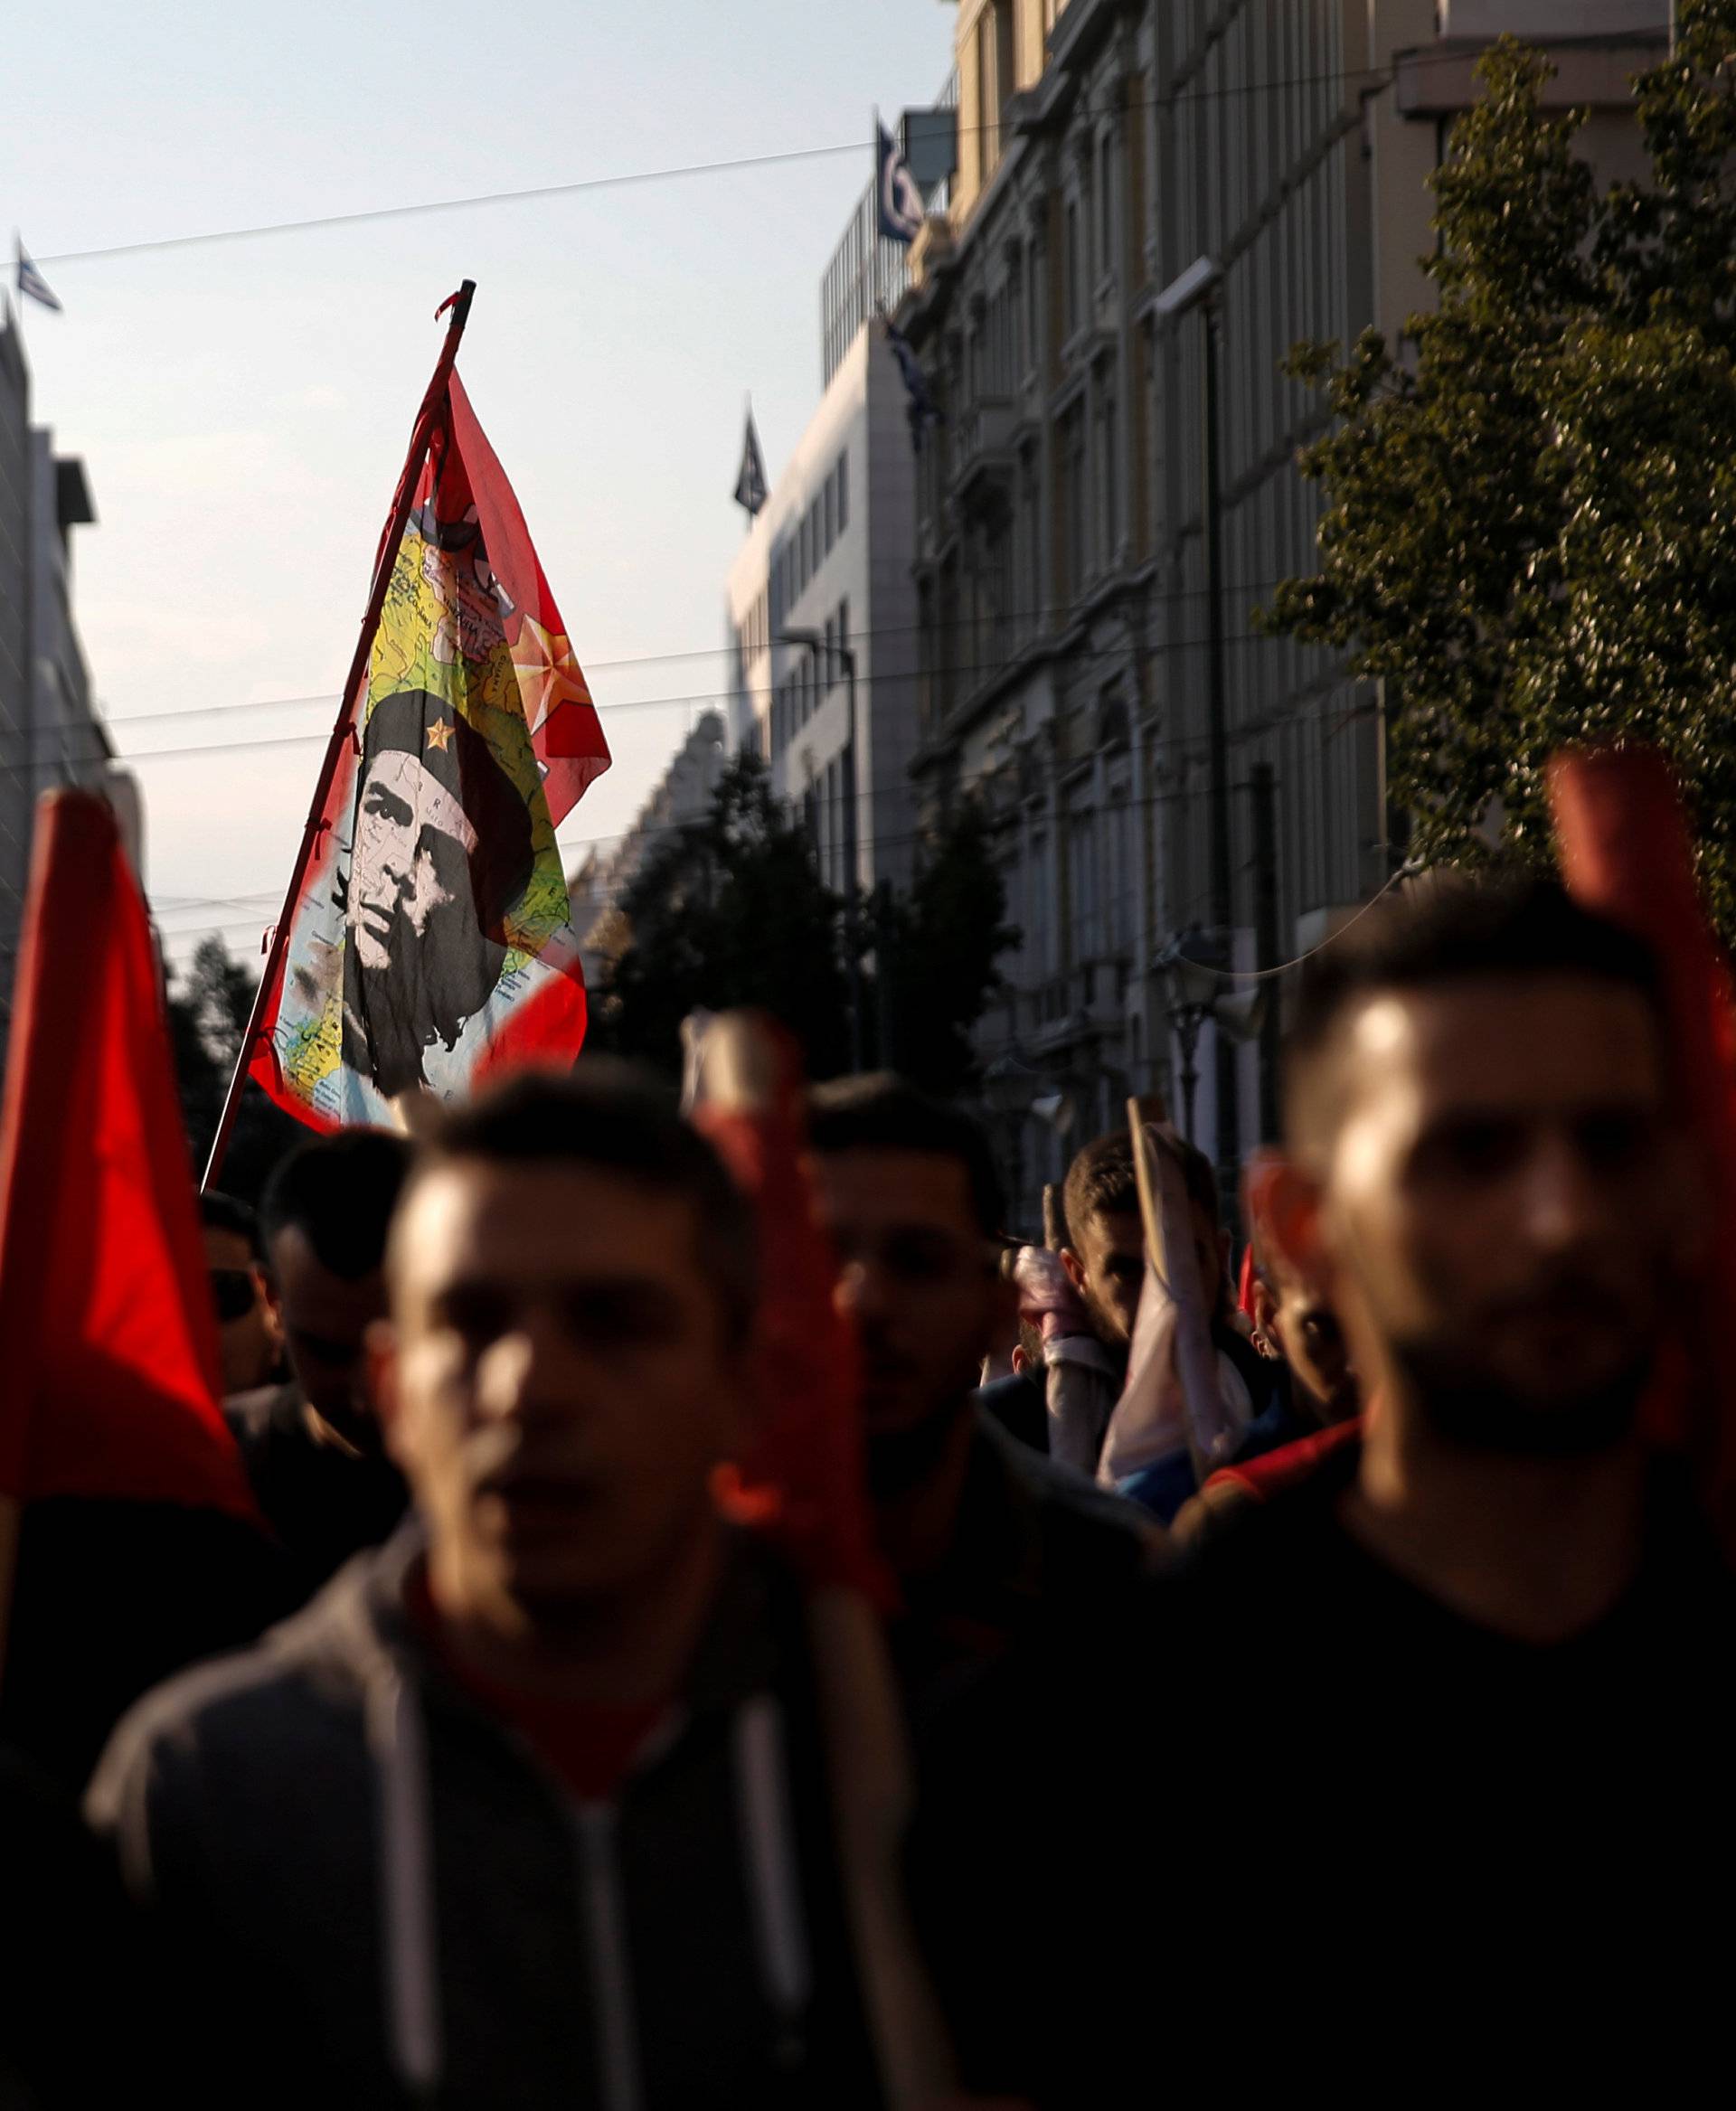 Members of the communist-affiliated PAME union march as a flag with an image of revolutionary leader Che Guevara waves during a 48-hour general strike against tax and pension reforms in Athens